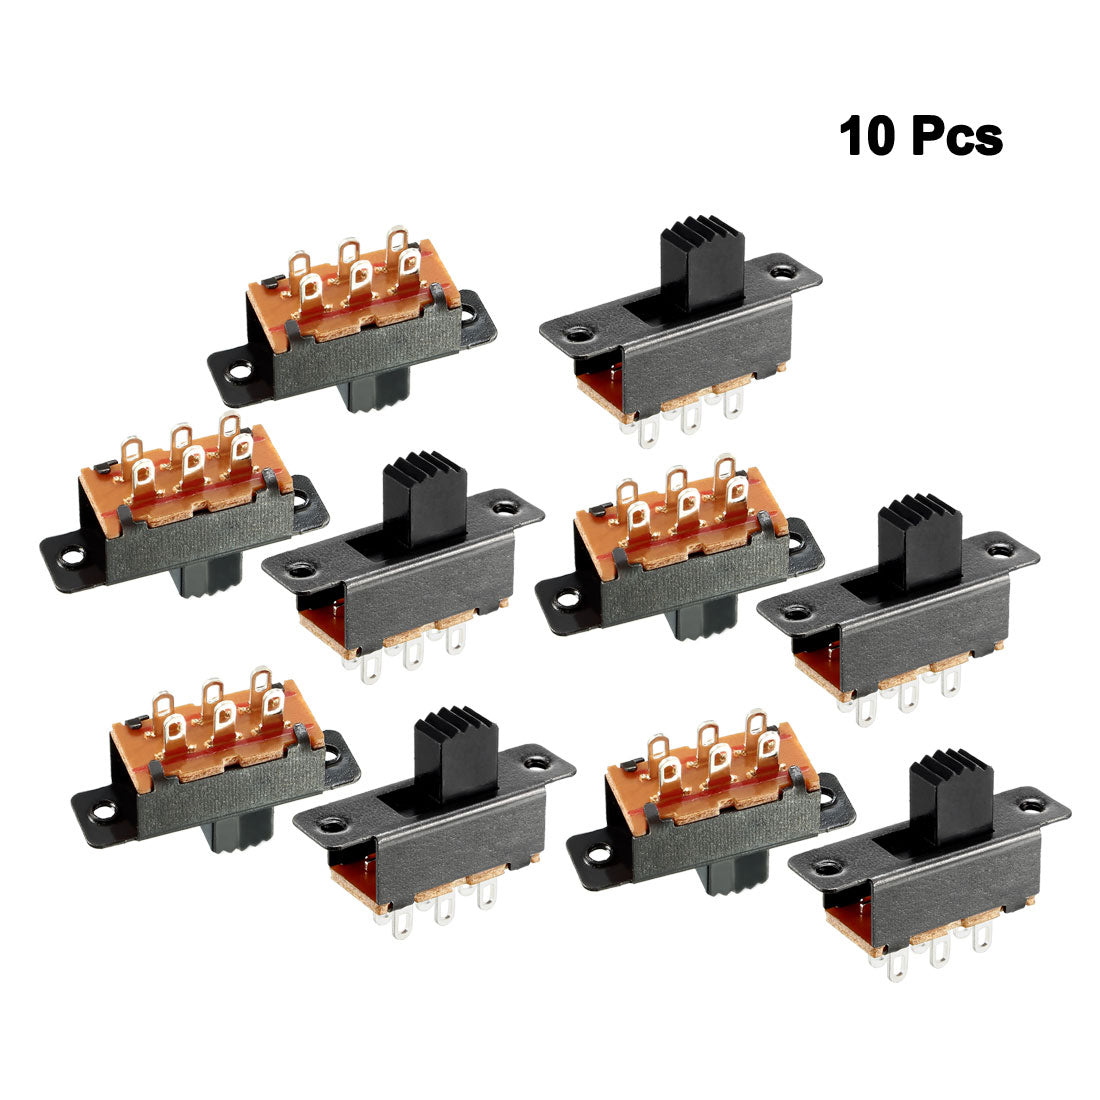 uxcell Uxcell 10Pcs 6mm Vertical Slide Switch DPDT 2P2T 6 Terminals PCB Panel Latching